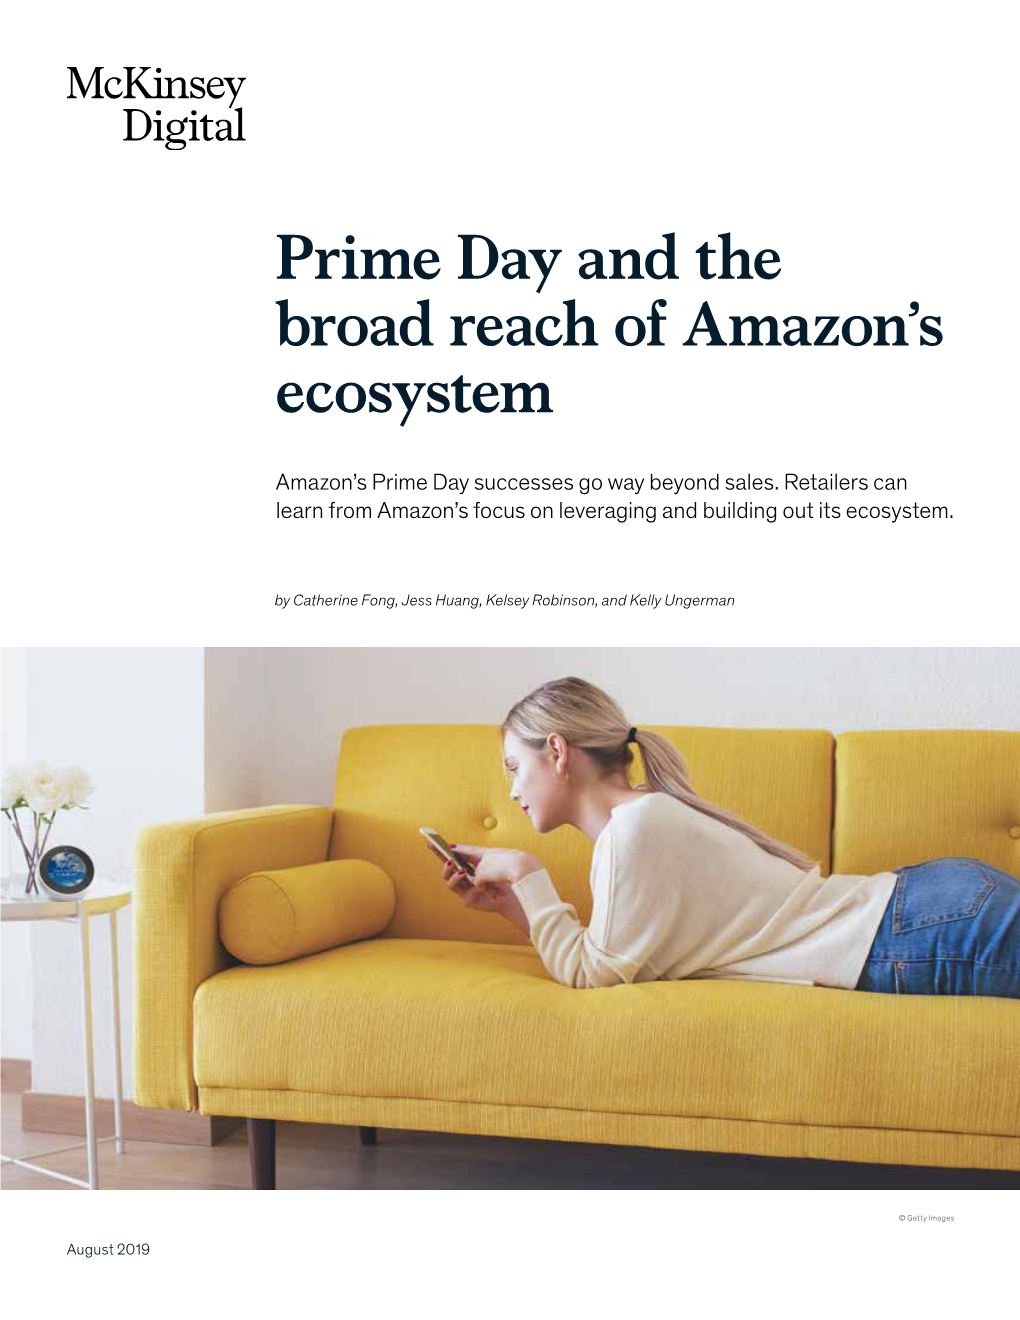 Prime Day and the Broad Reach of Amazon's Ecosystem